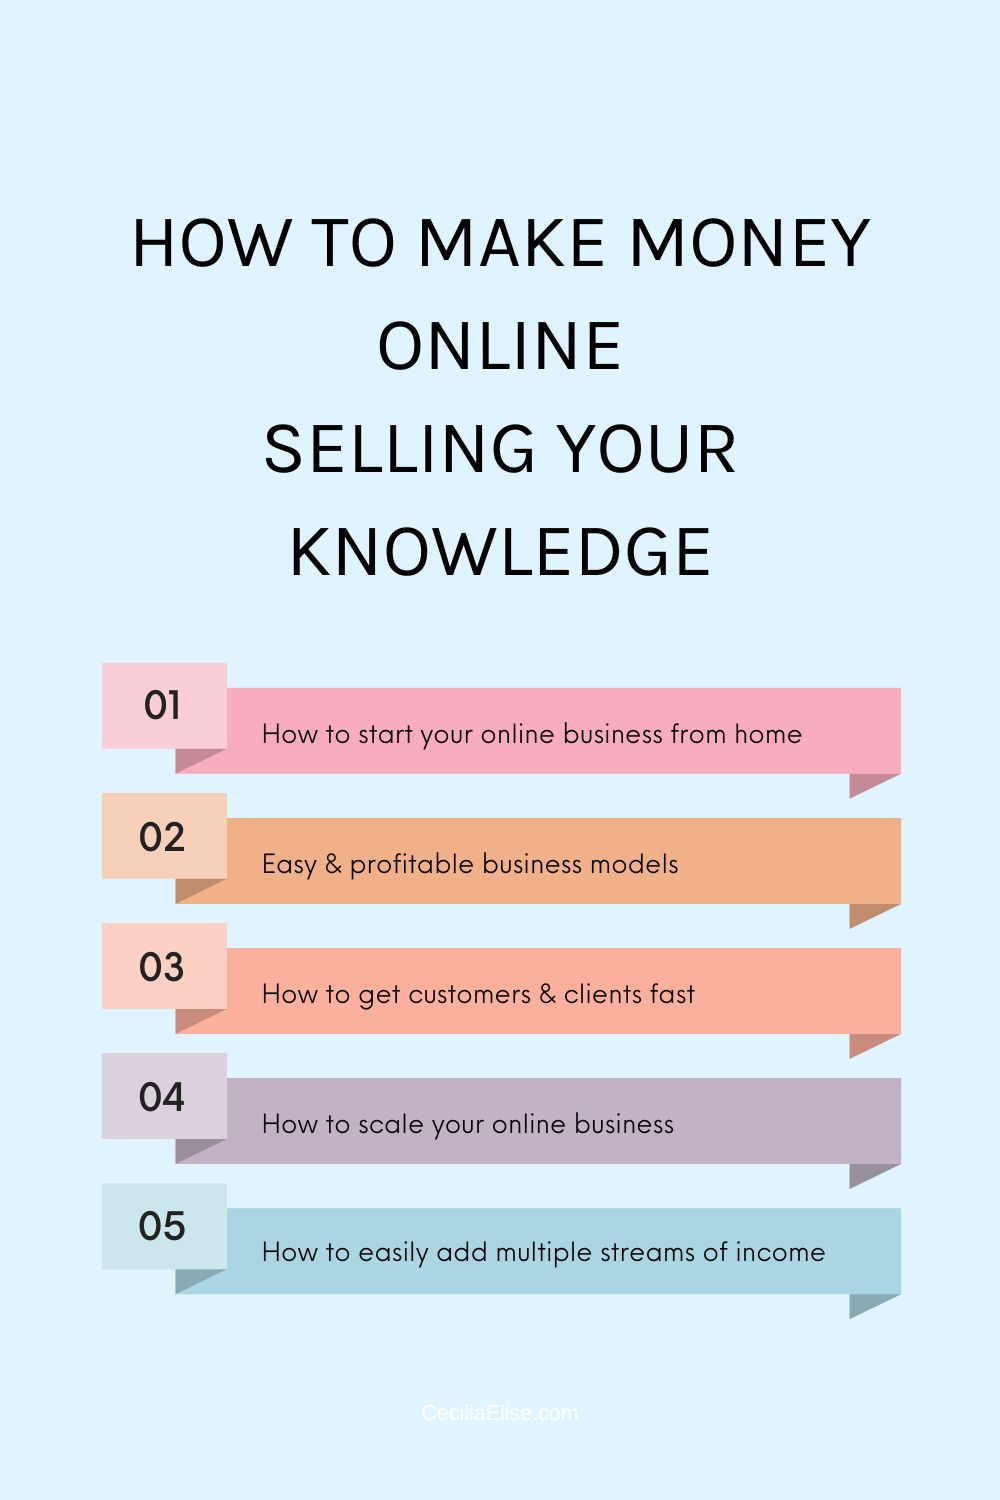 How to make money online selling your knowledge